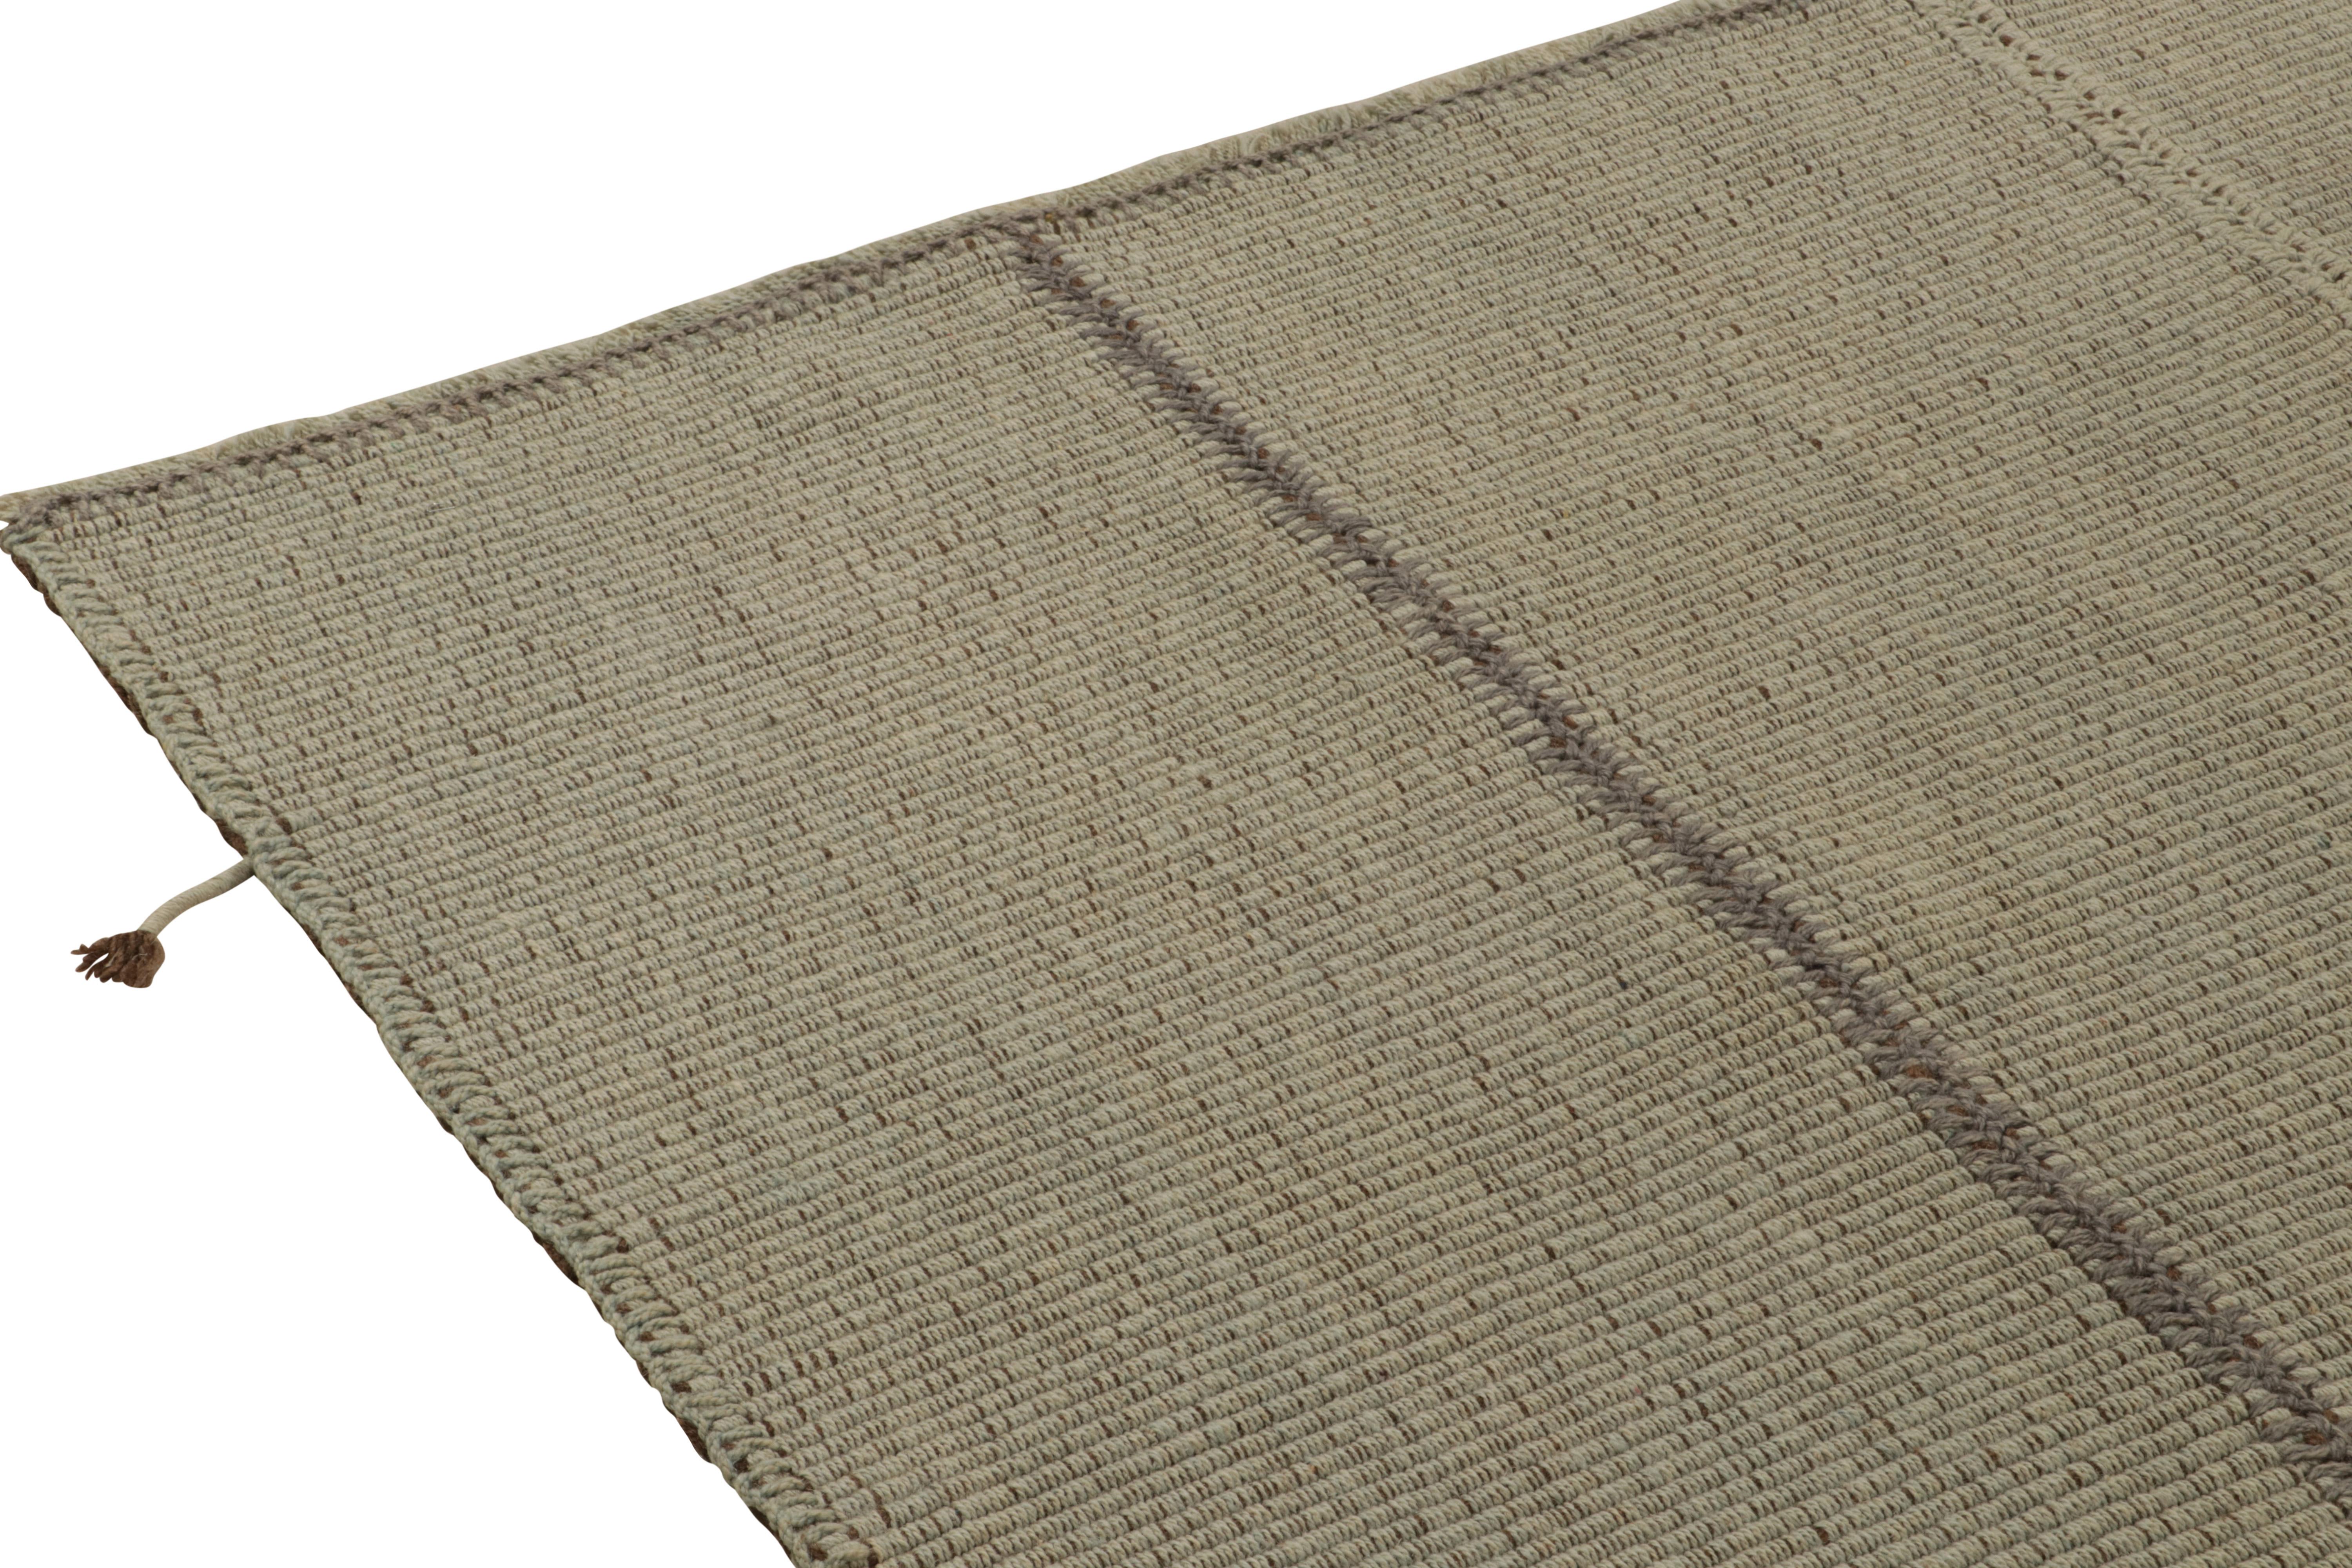 Rug & Kilim’s Custom Kilim in Beige-Brown and Blue, Panel Woven style In New Condition For Sale In Long Island City, NY